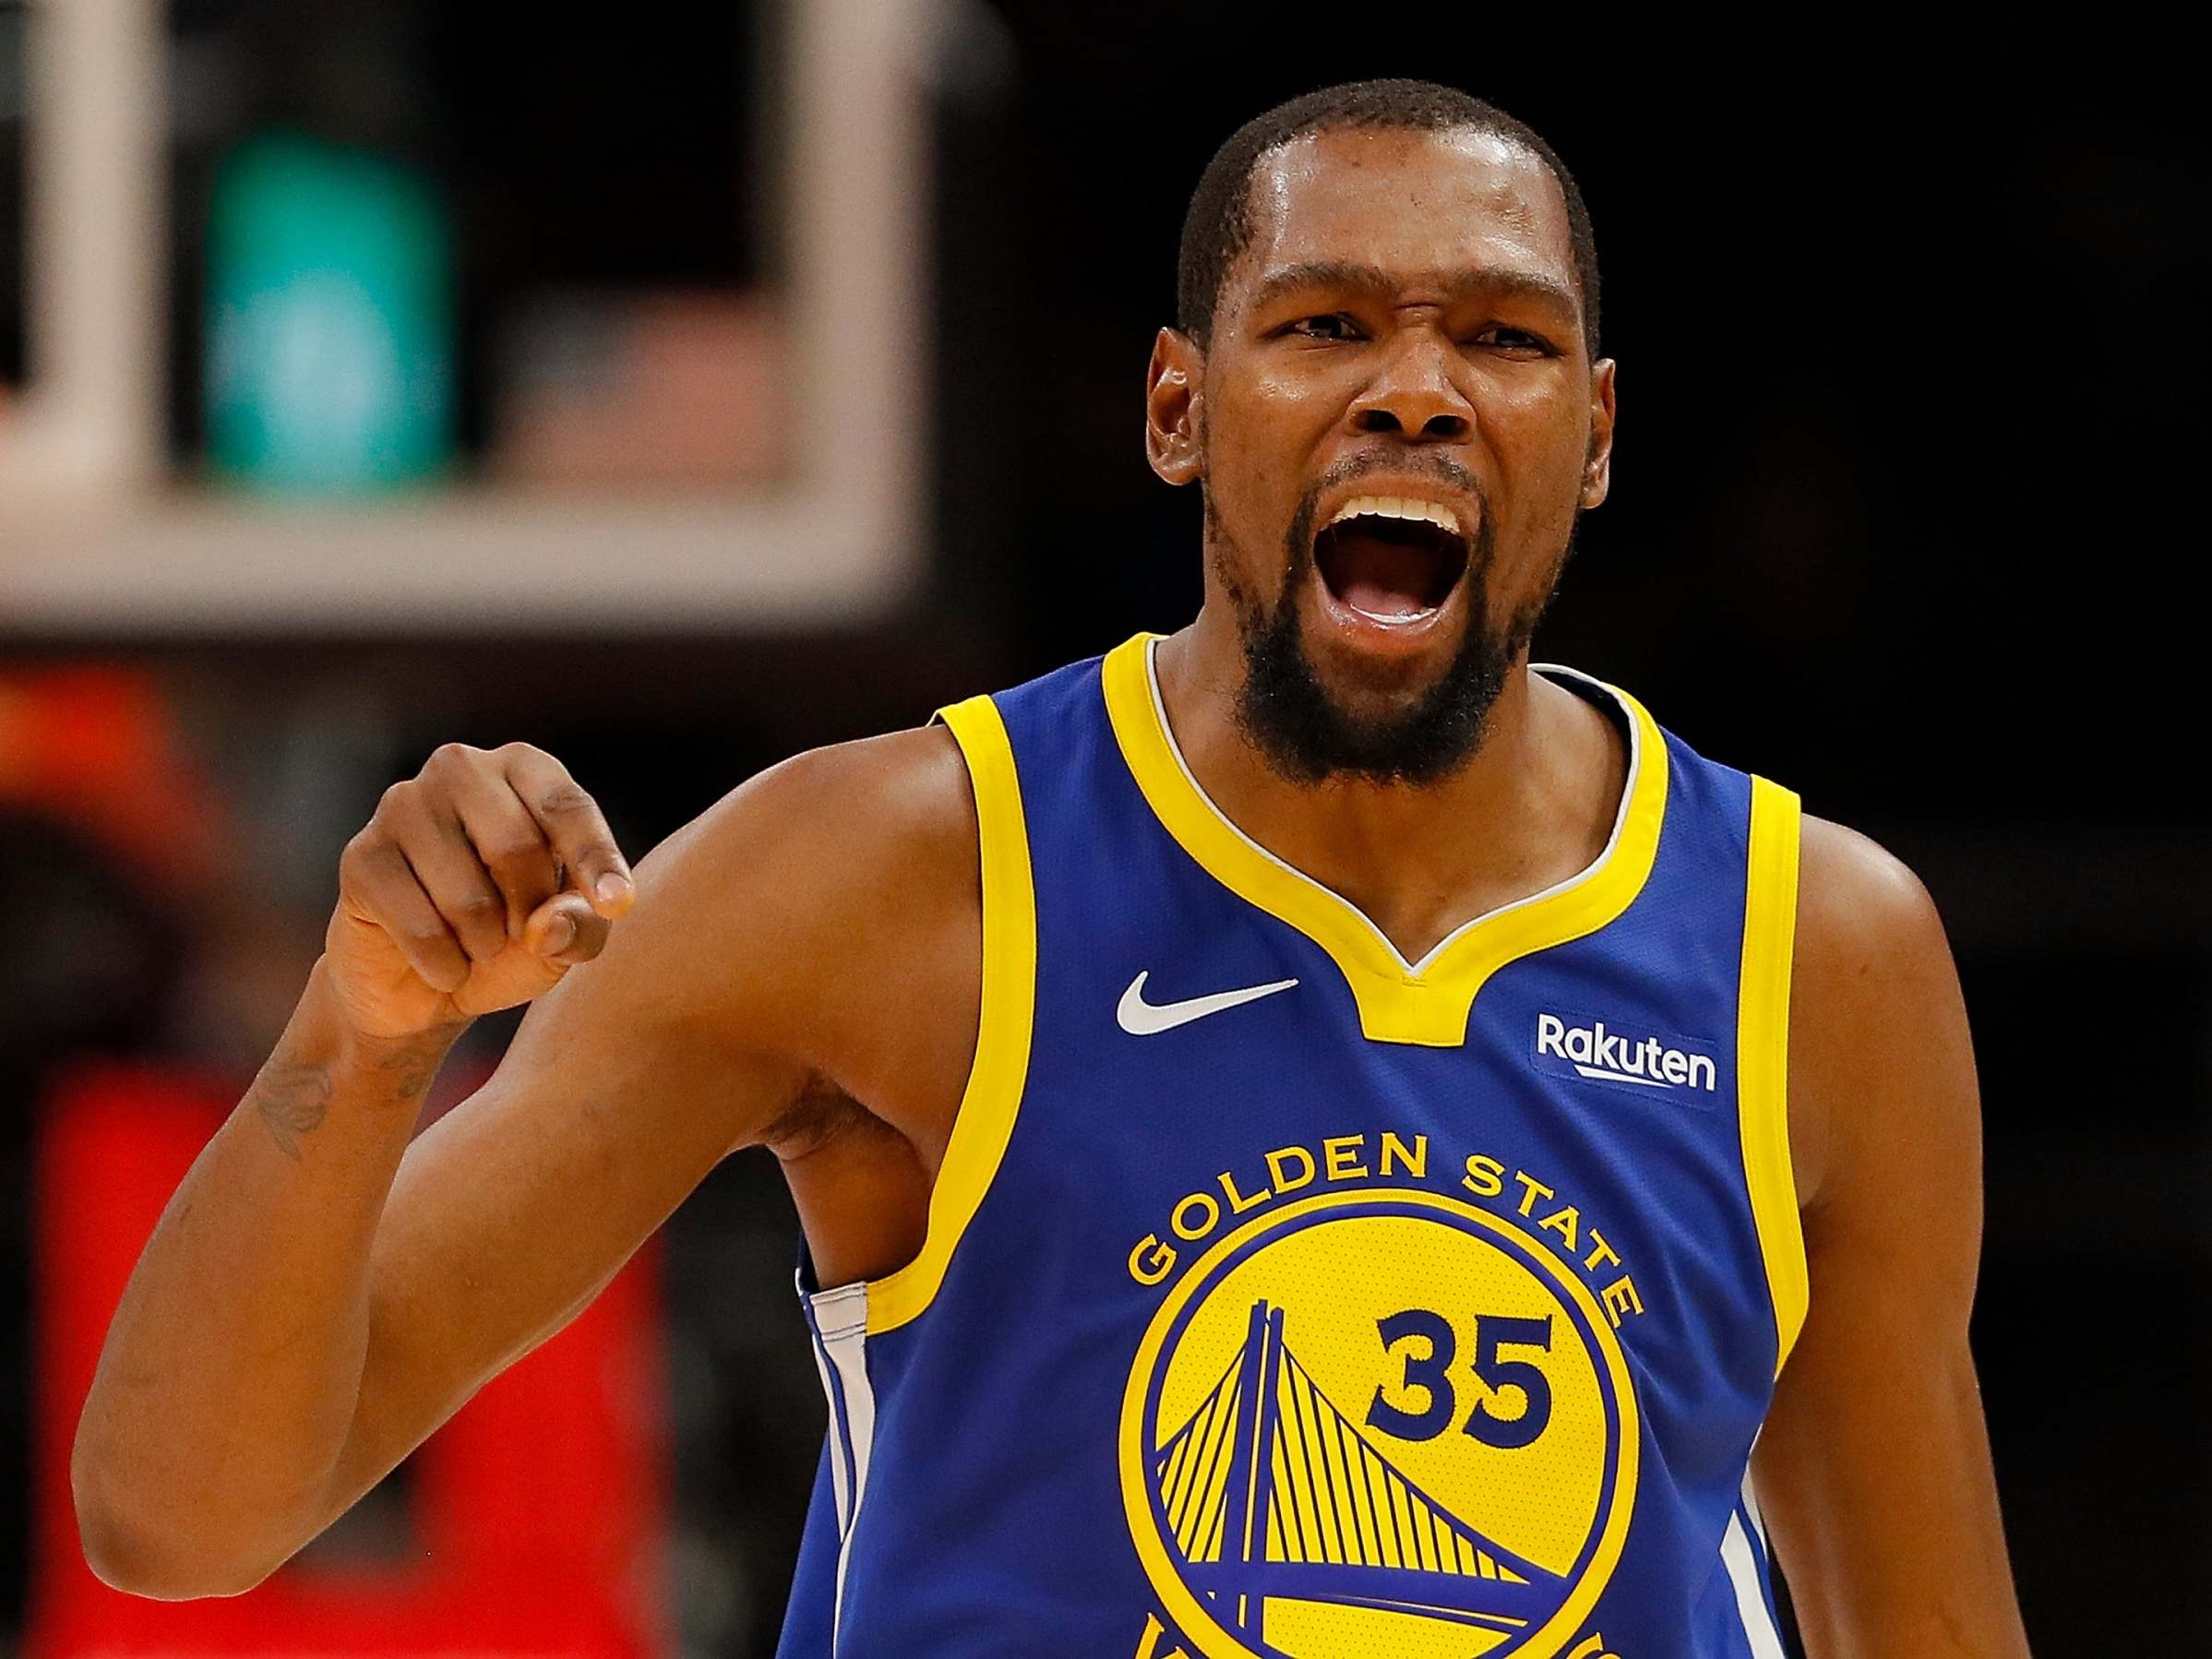 Kevin Durant won the two NBA Championships with the Golden State Warriors